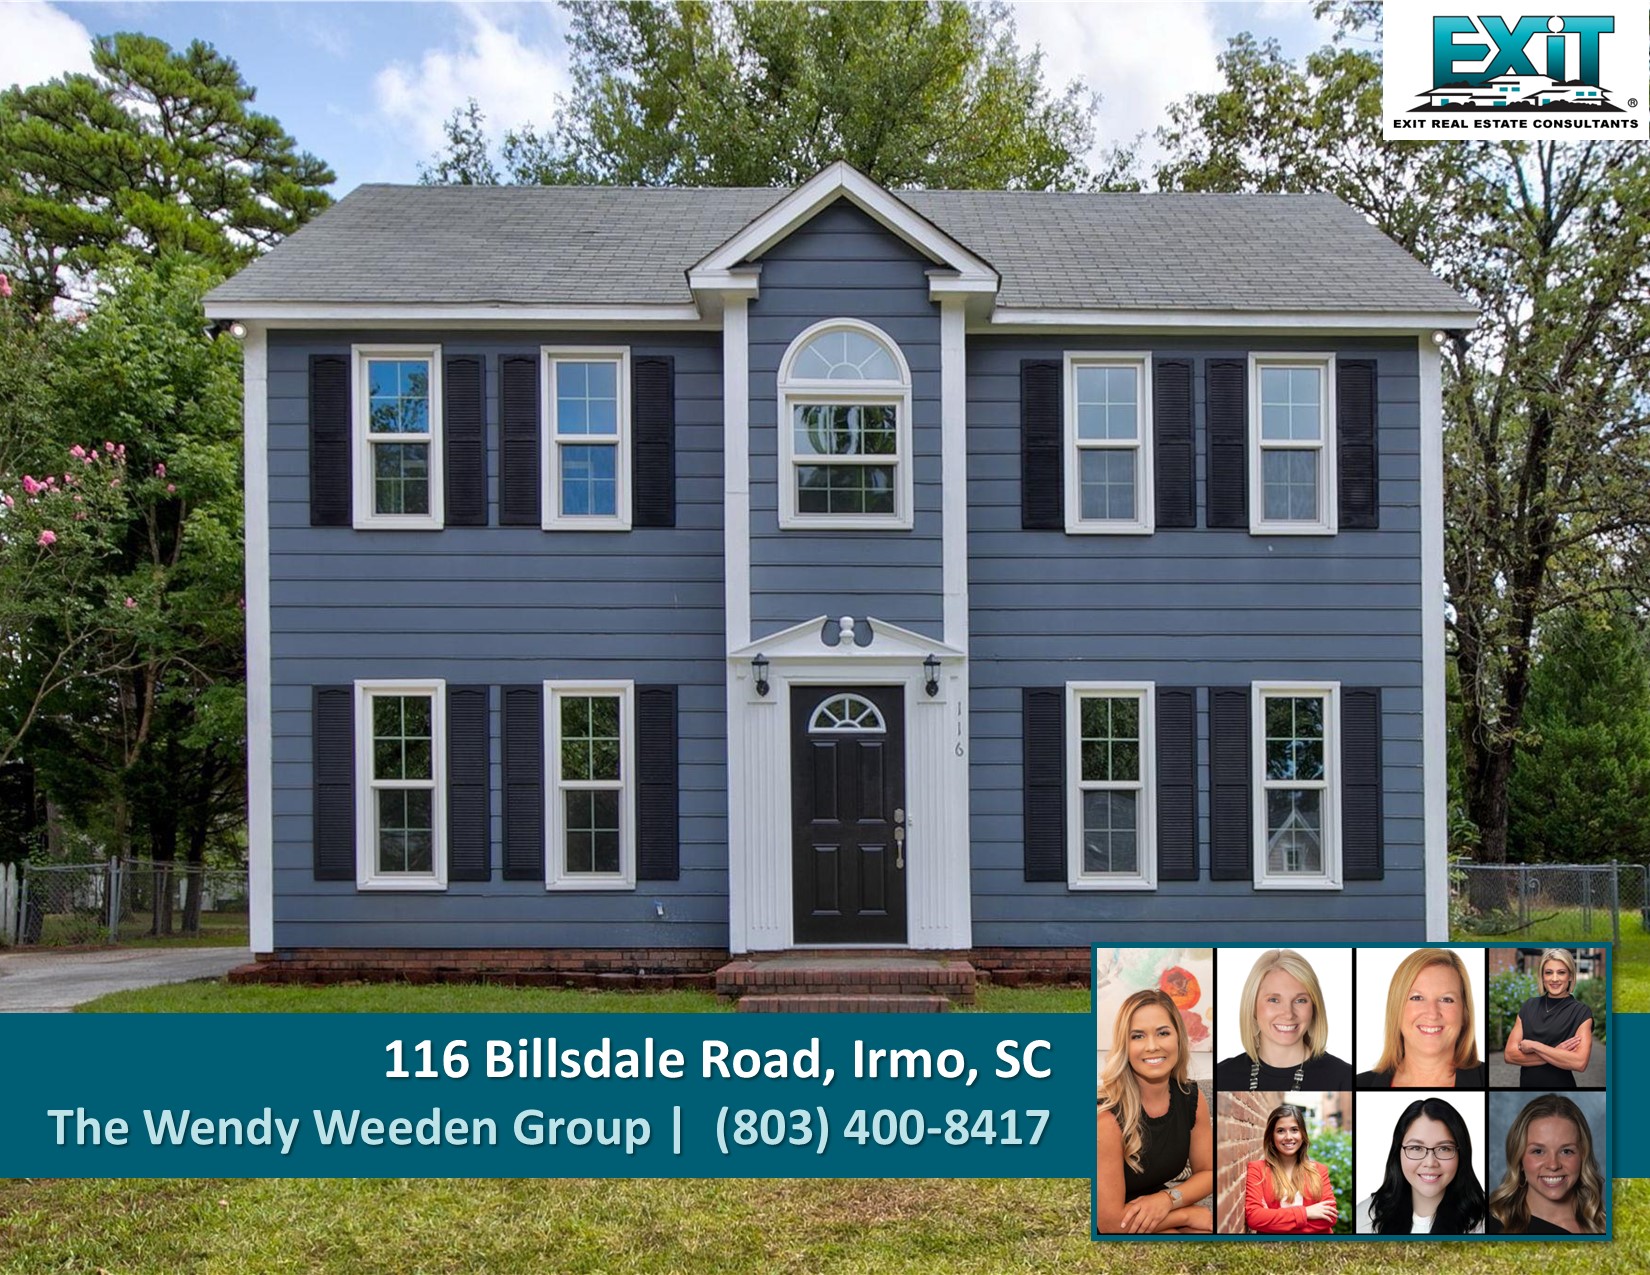 Just listed in New Friarsgate - Irmo